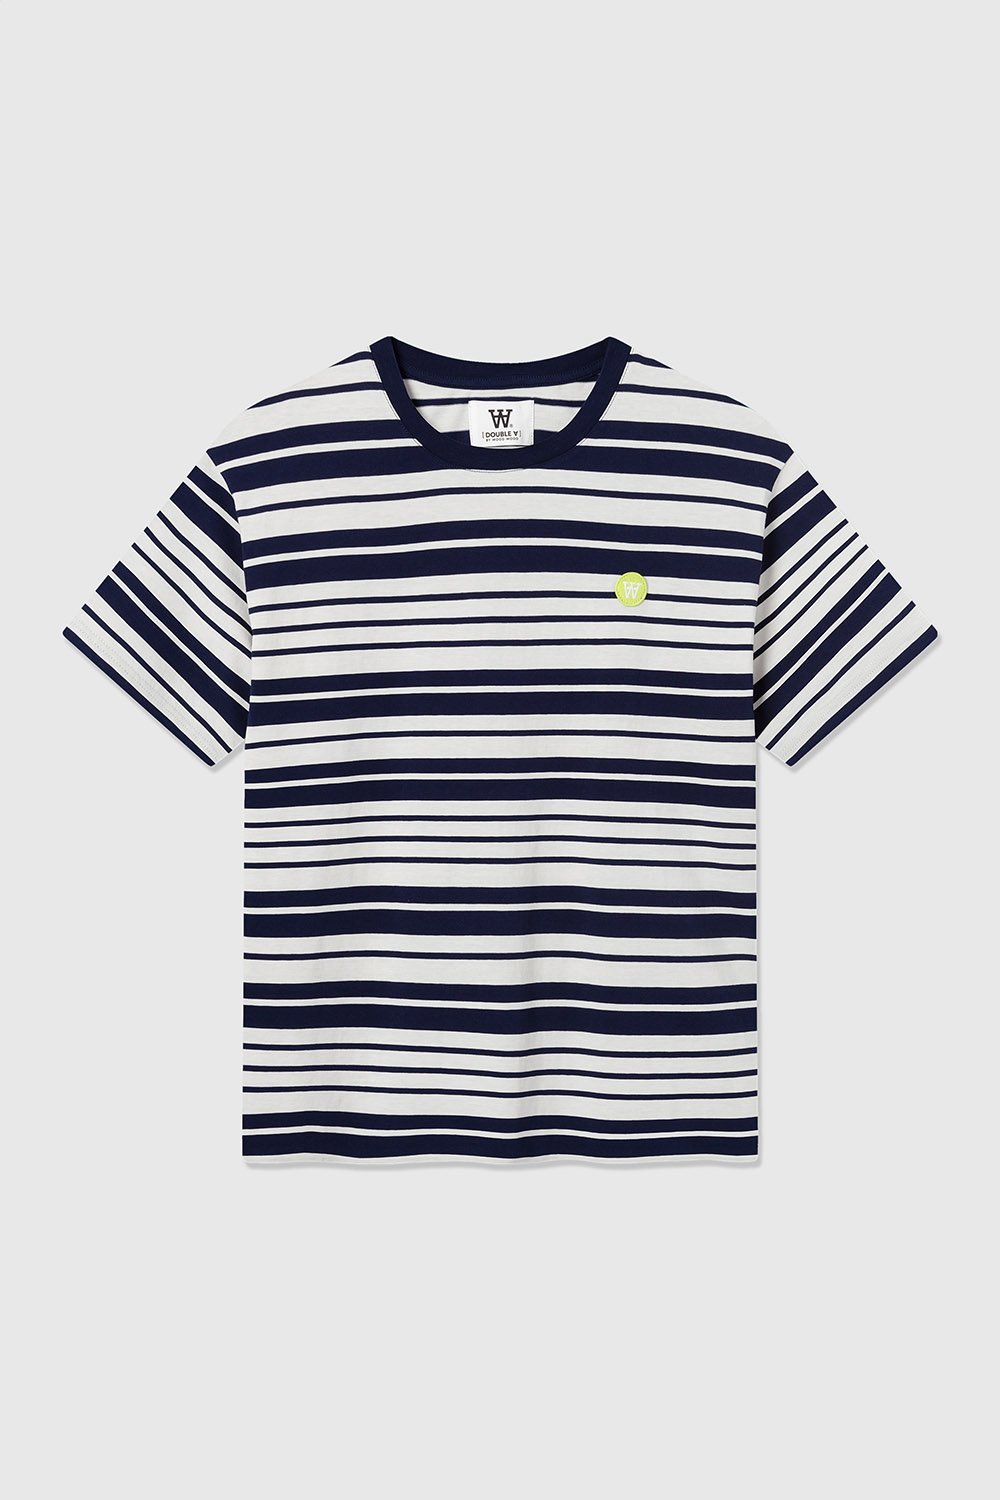 Double A by Wood Wood Ace stripe T-shirt Off-white/navy stripes ...